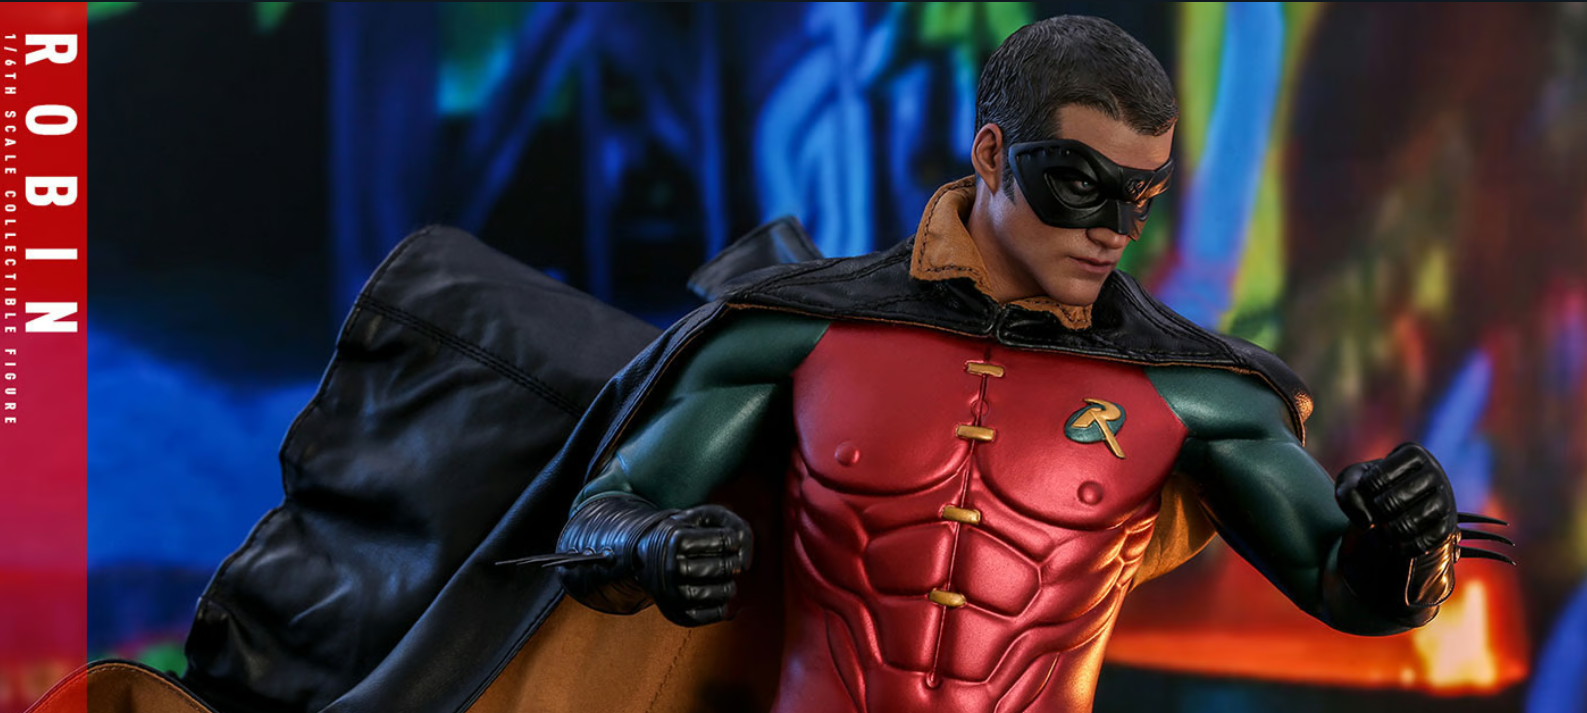 30% OFF! Hot Toys Batman Forever Robin Sixth Scale Collectible Figure  Zombie.co.uk